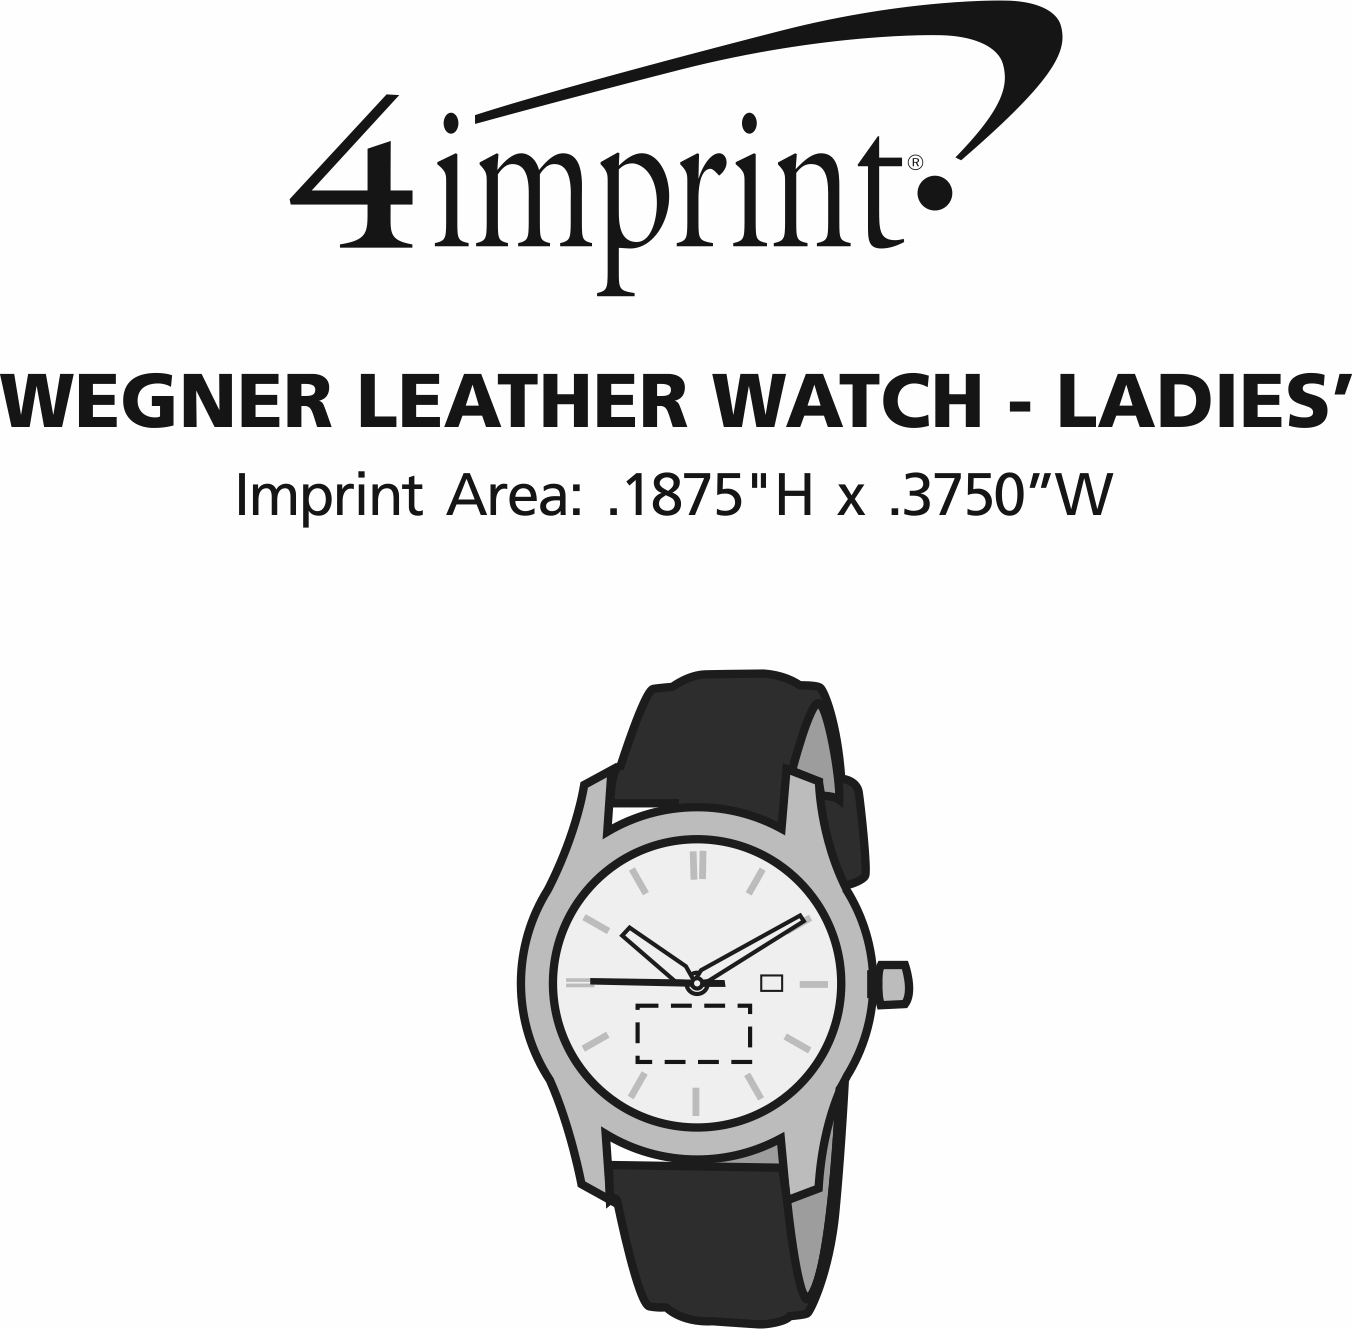 Imprint Area of Wenger Leather Watch - 1-1/4"